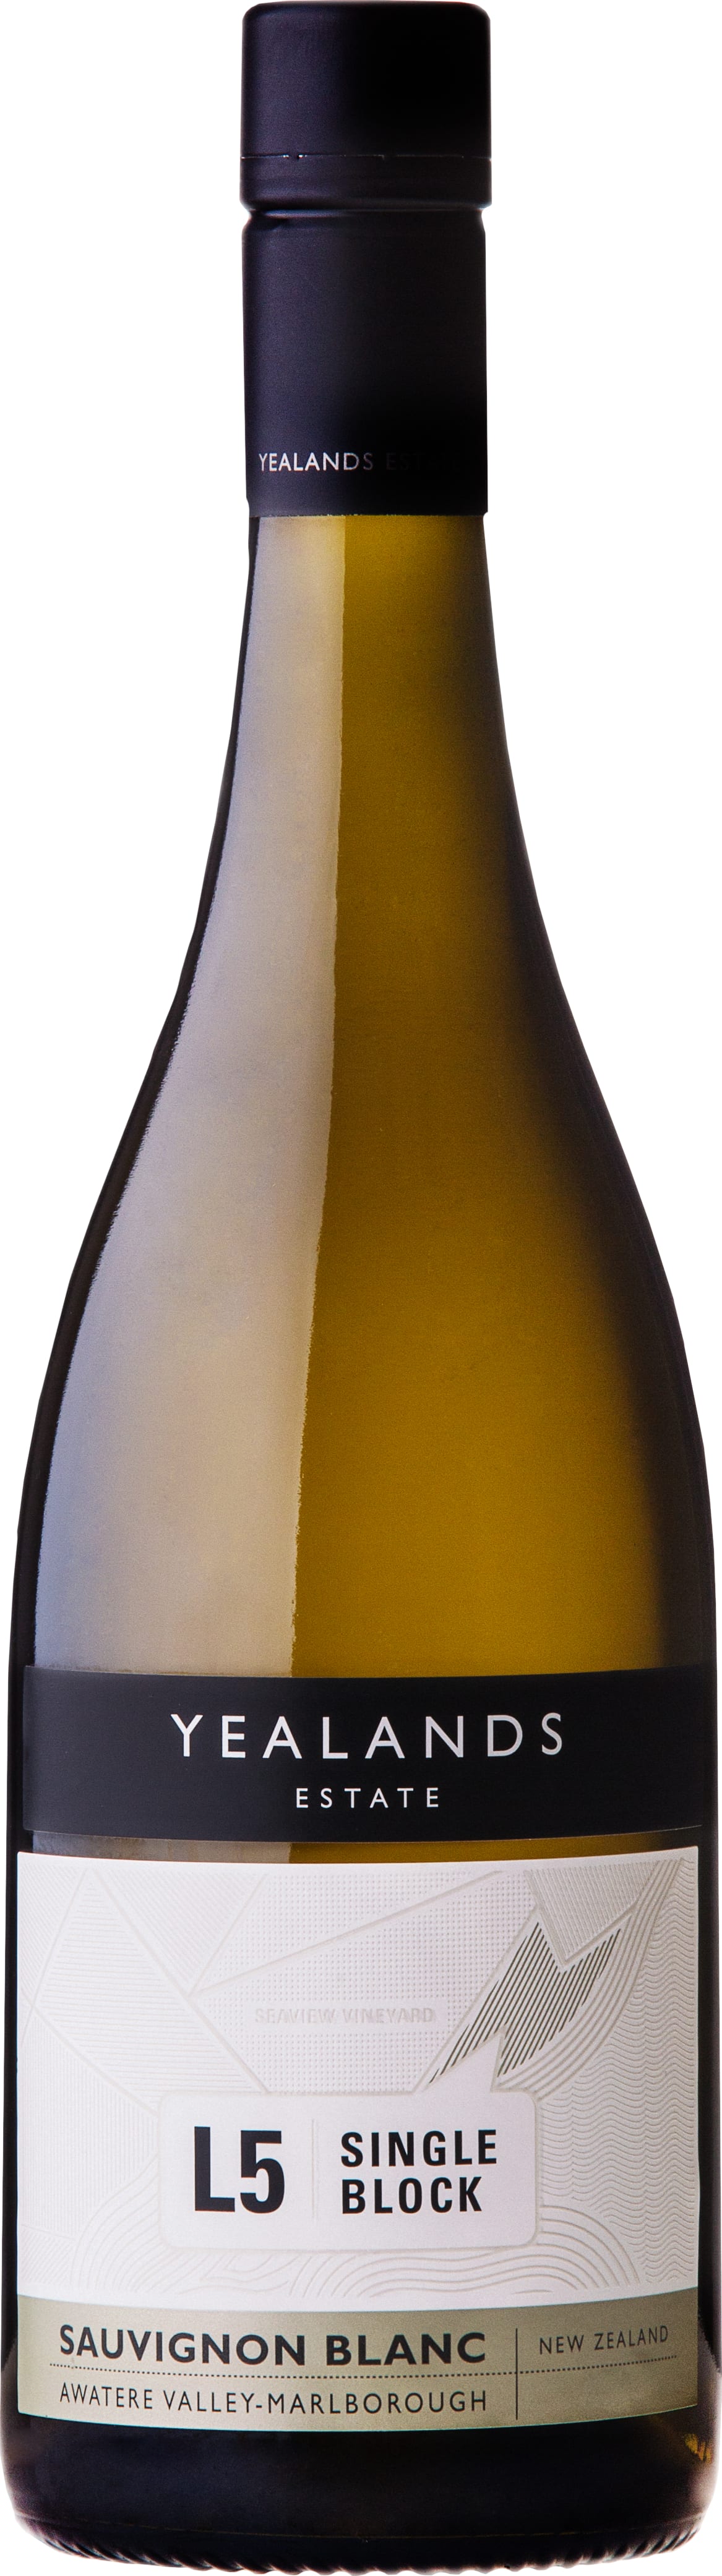 Yealands Estate Single Block L5 Sauvignon Blanc 2021 75cl - Buy Yealands Estate Wines from GREAT WINES DIRECT wine shop